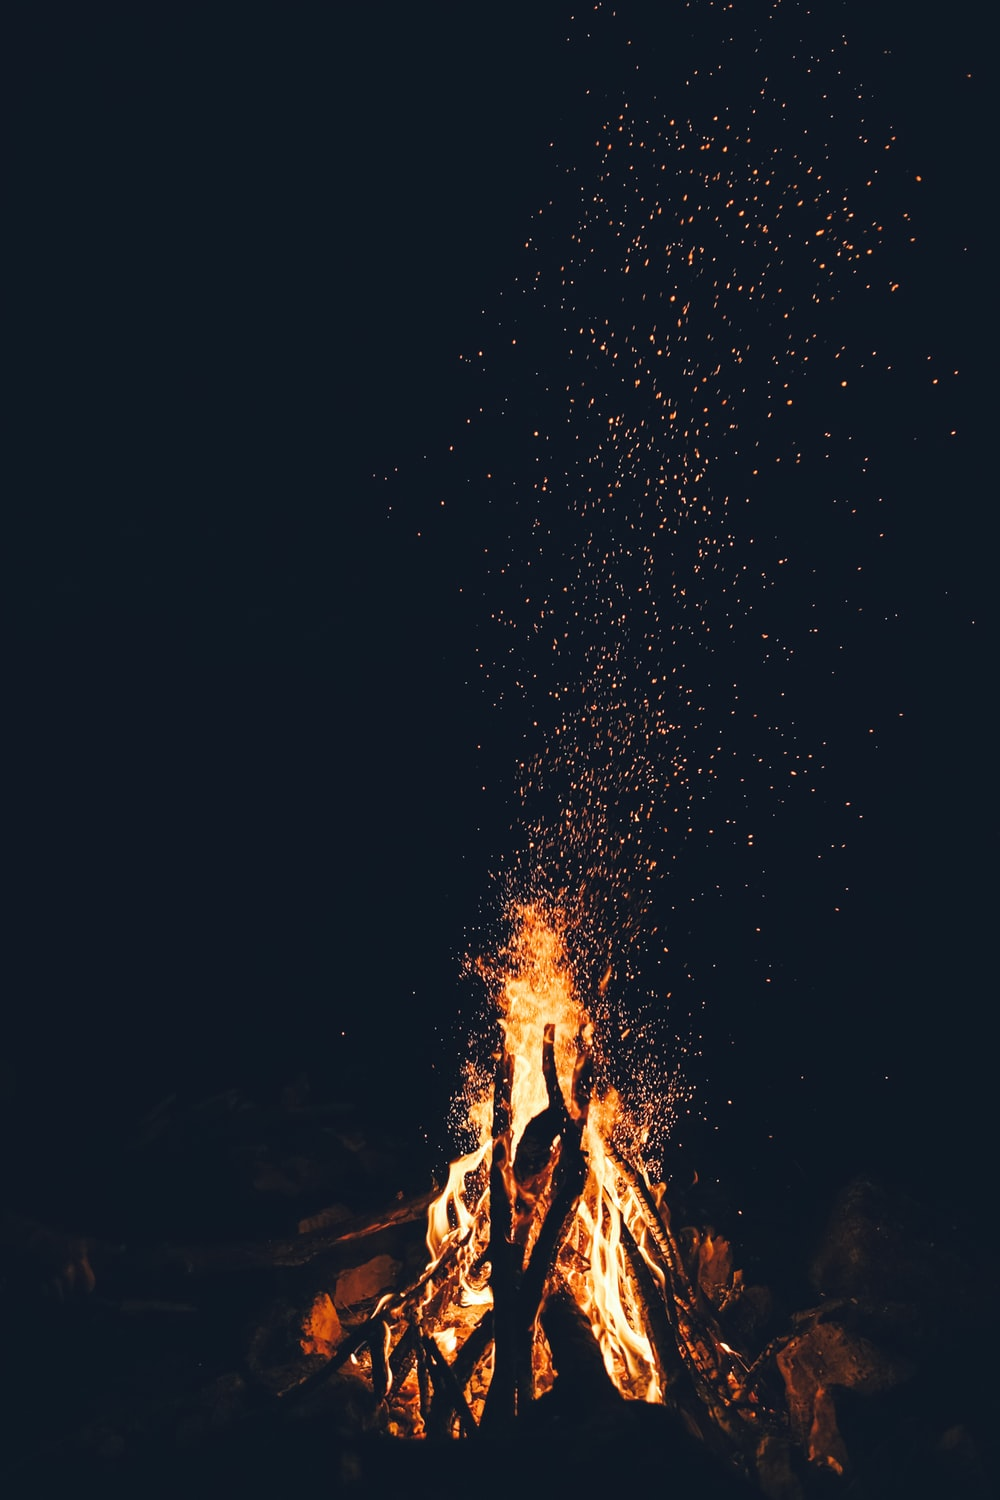 Bonfire Picture [HD]. Download. Campfires picture, iPhone wallpaper fire, Fall wallpaper